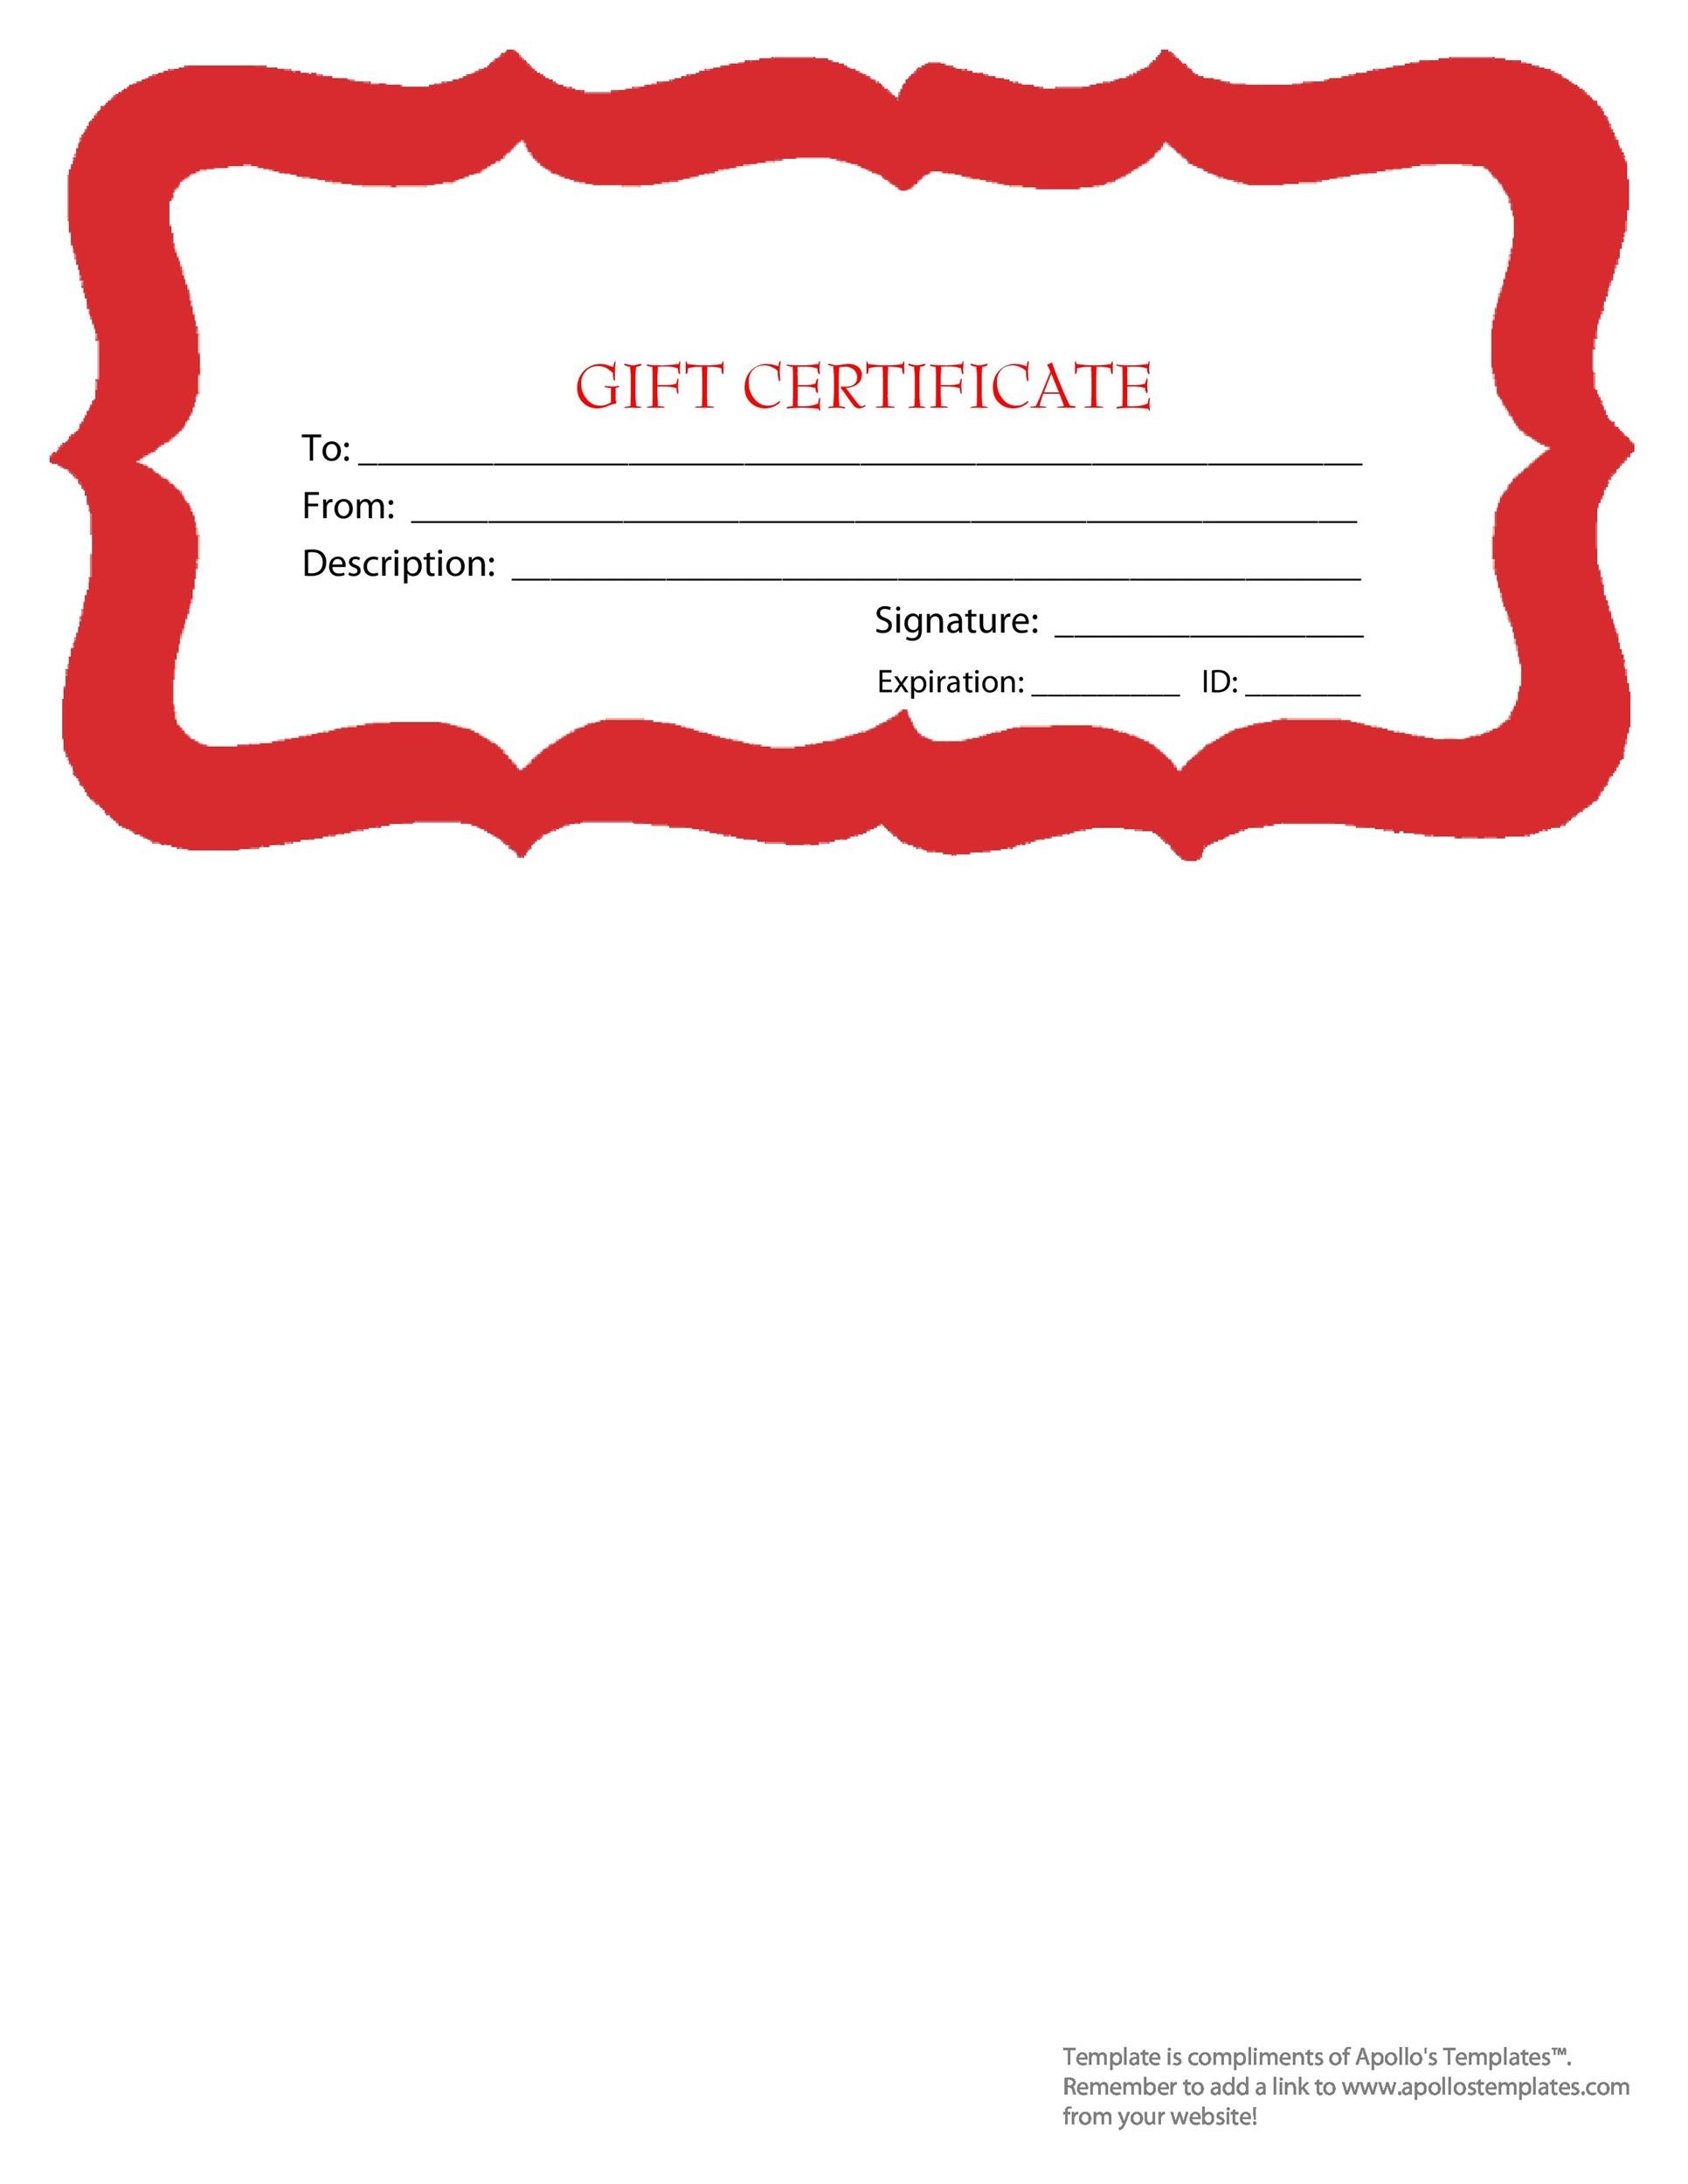 gift certificate templates free download microsoft word